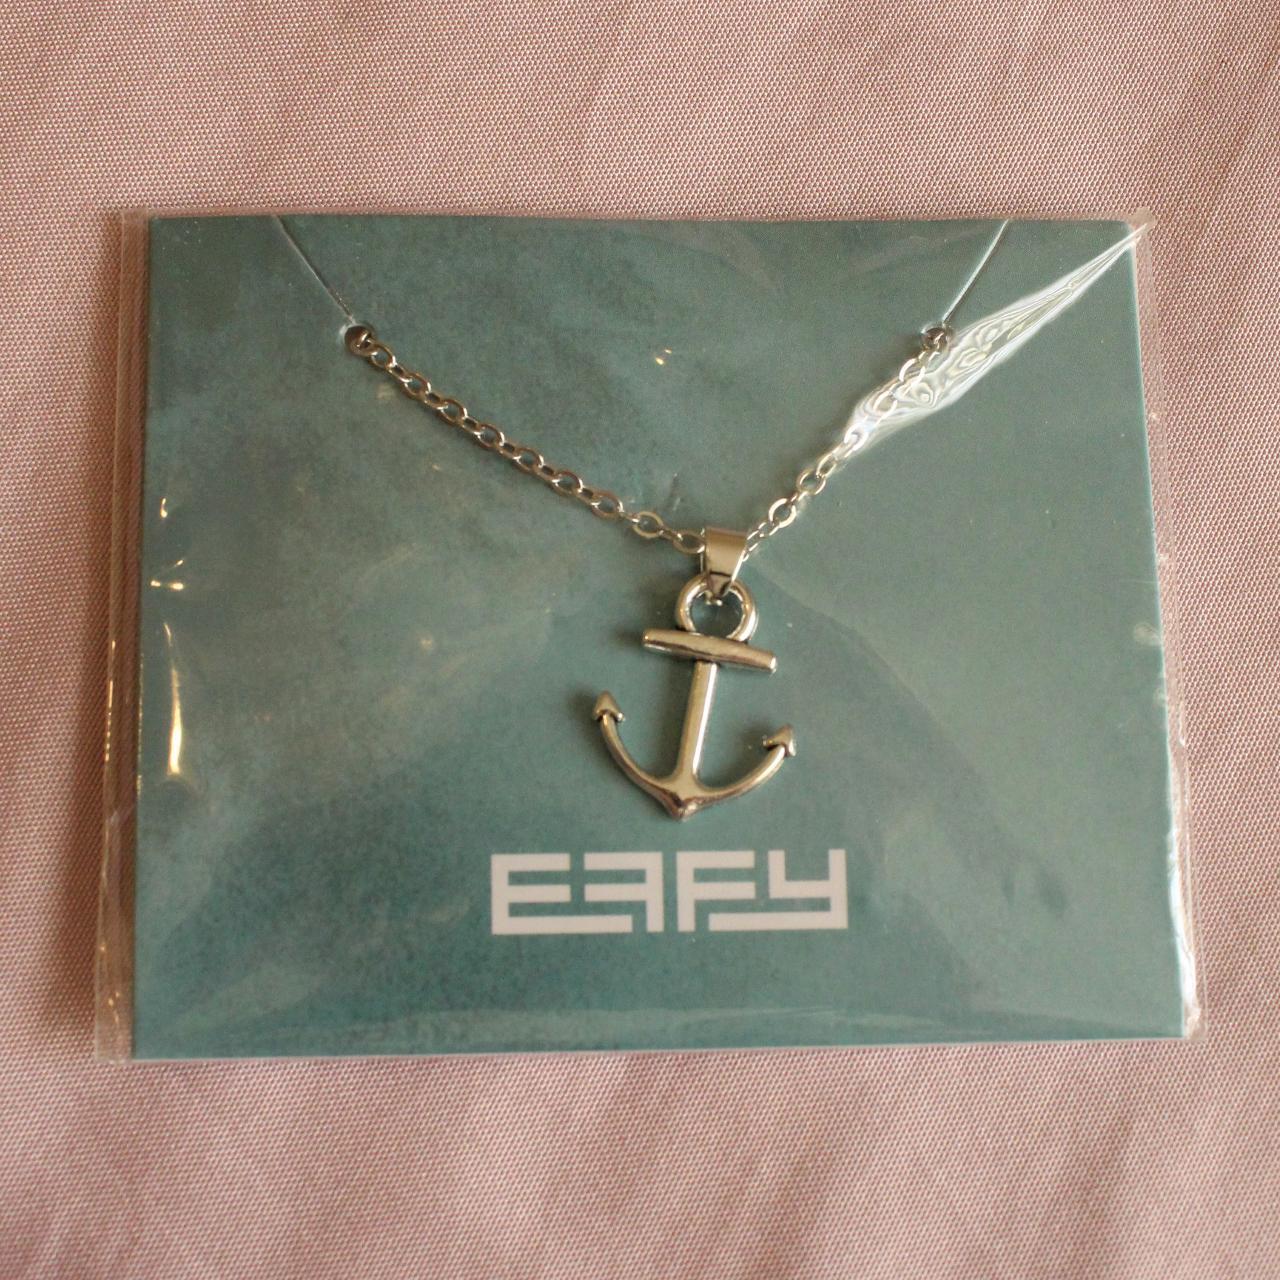 Product Image 1 - EFFY SILVER ANCHOR NECKLACE ⚓

★